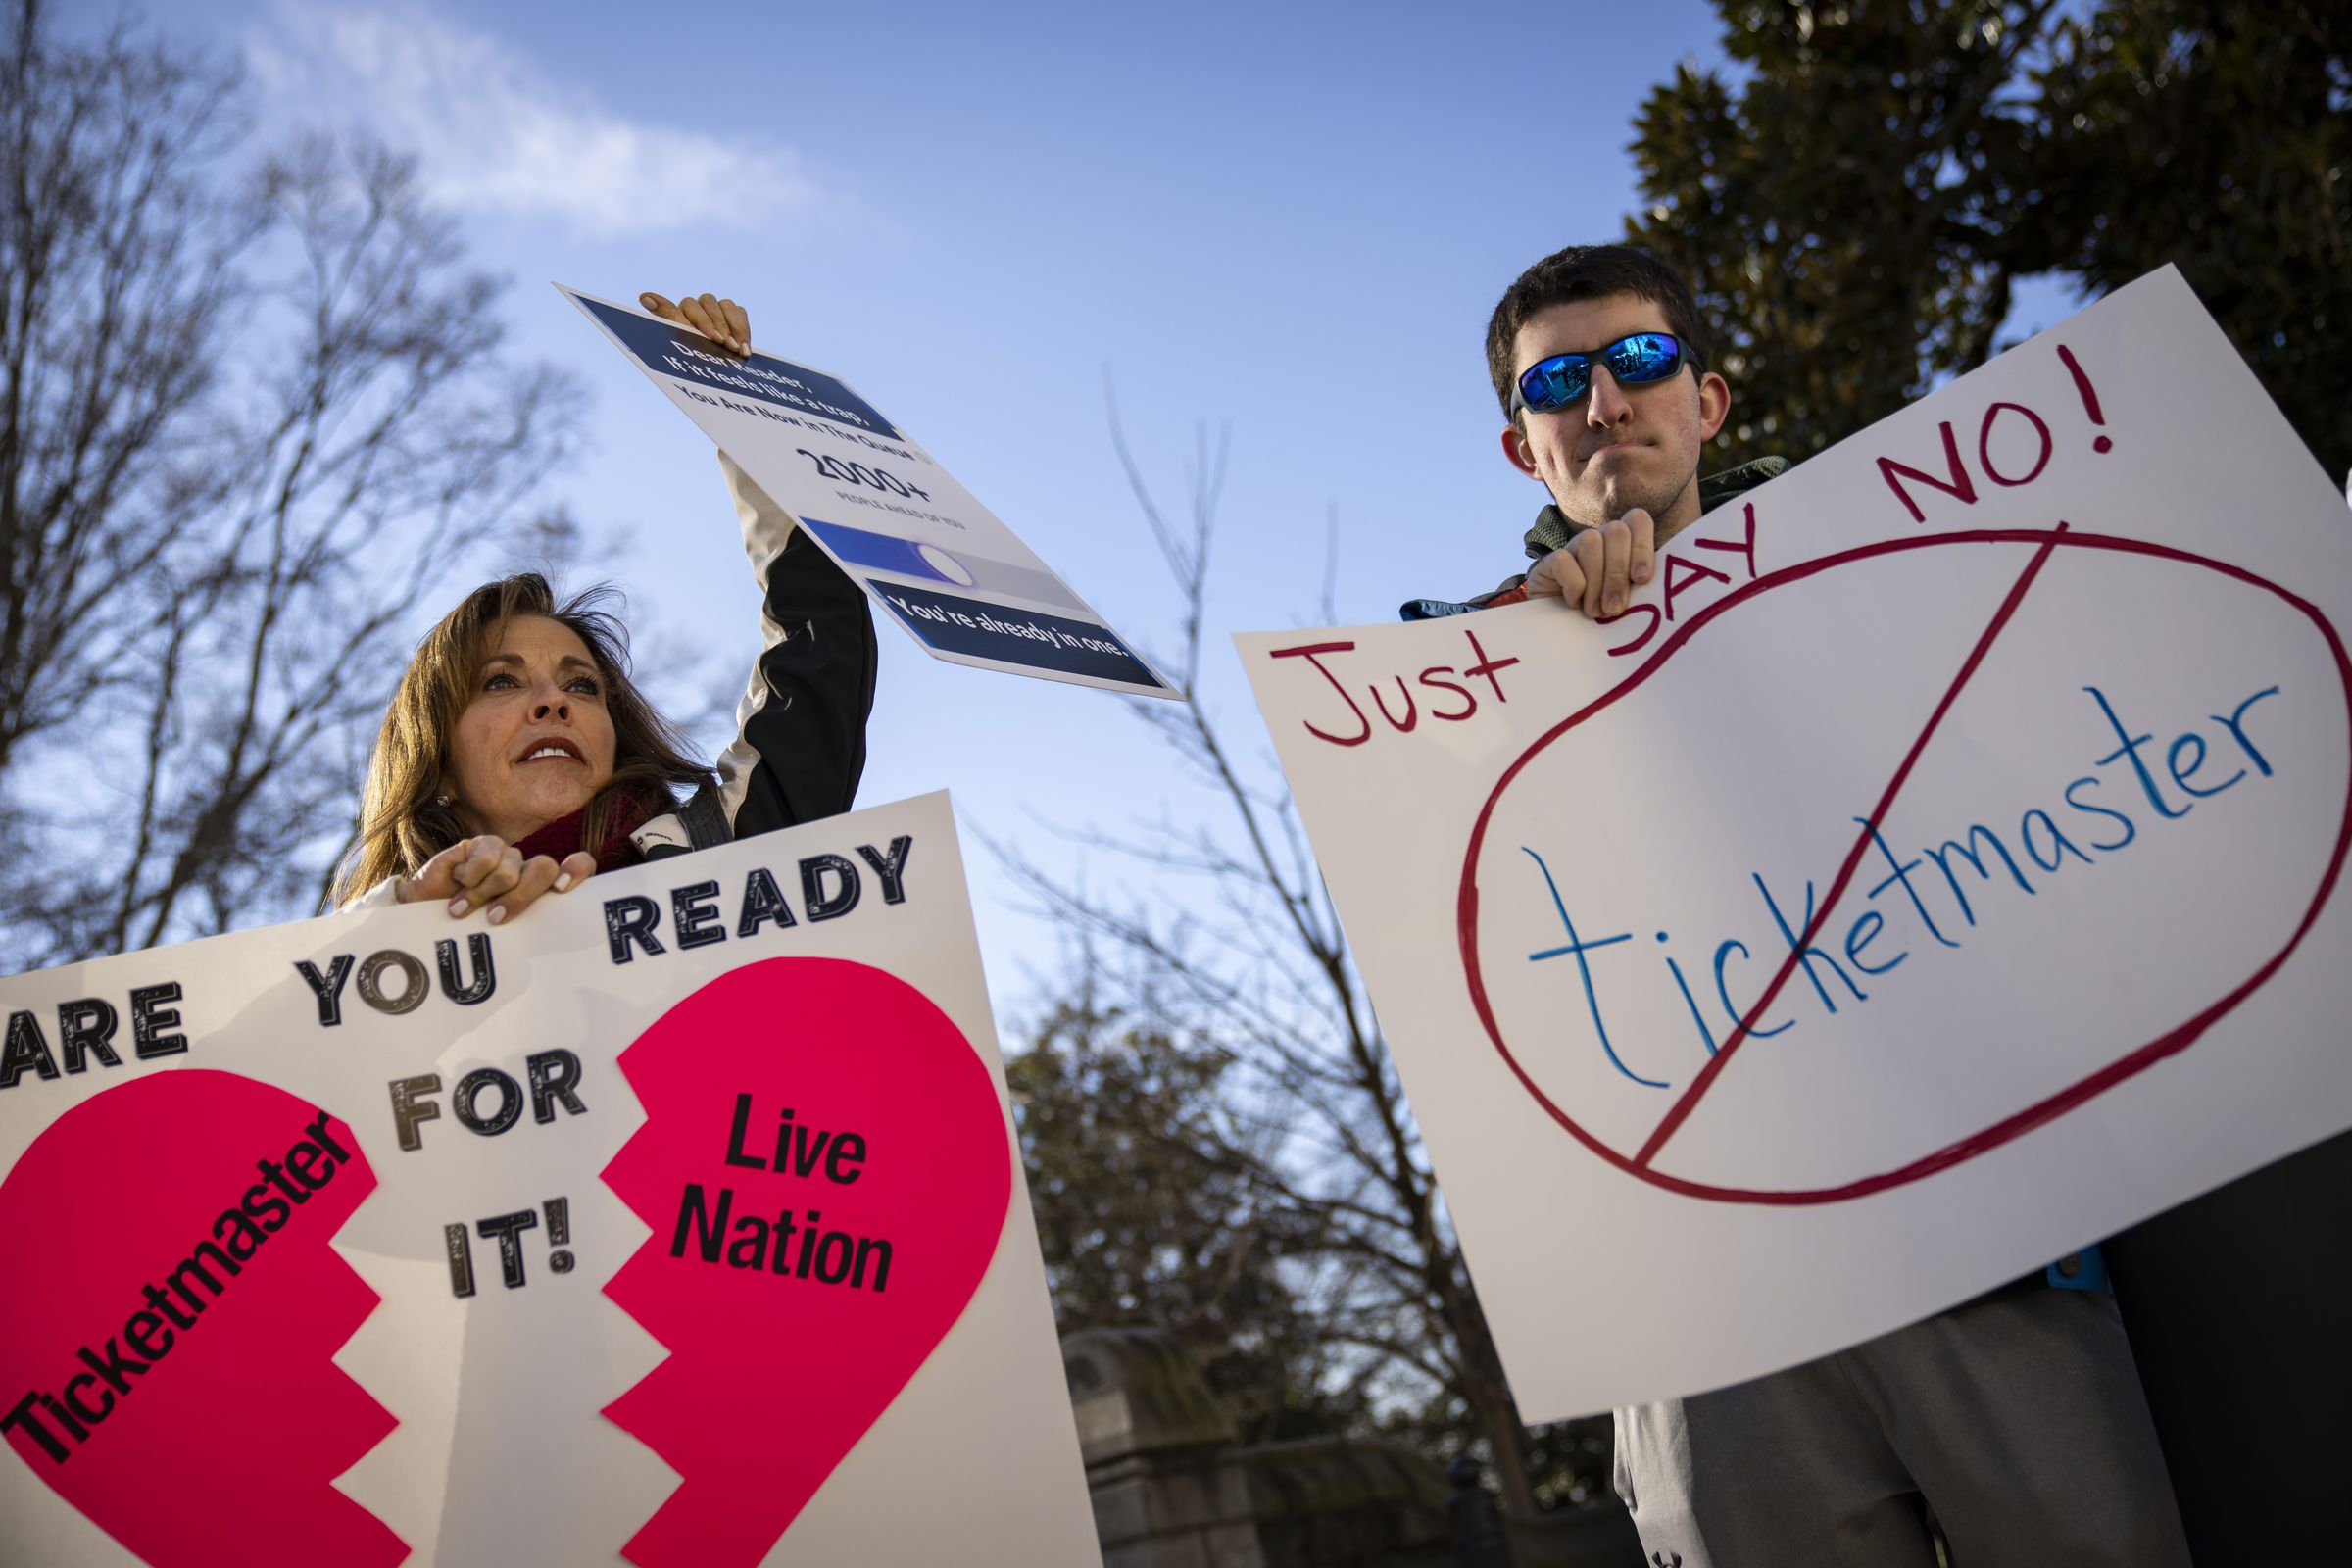 Taylor Swift fans demonstrate outside US Capitol as ticket industry executives testify to congress.